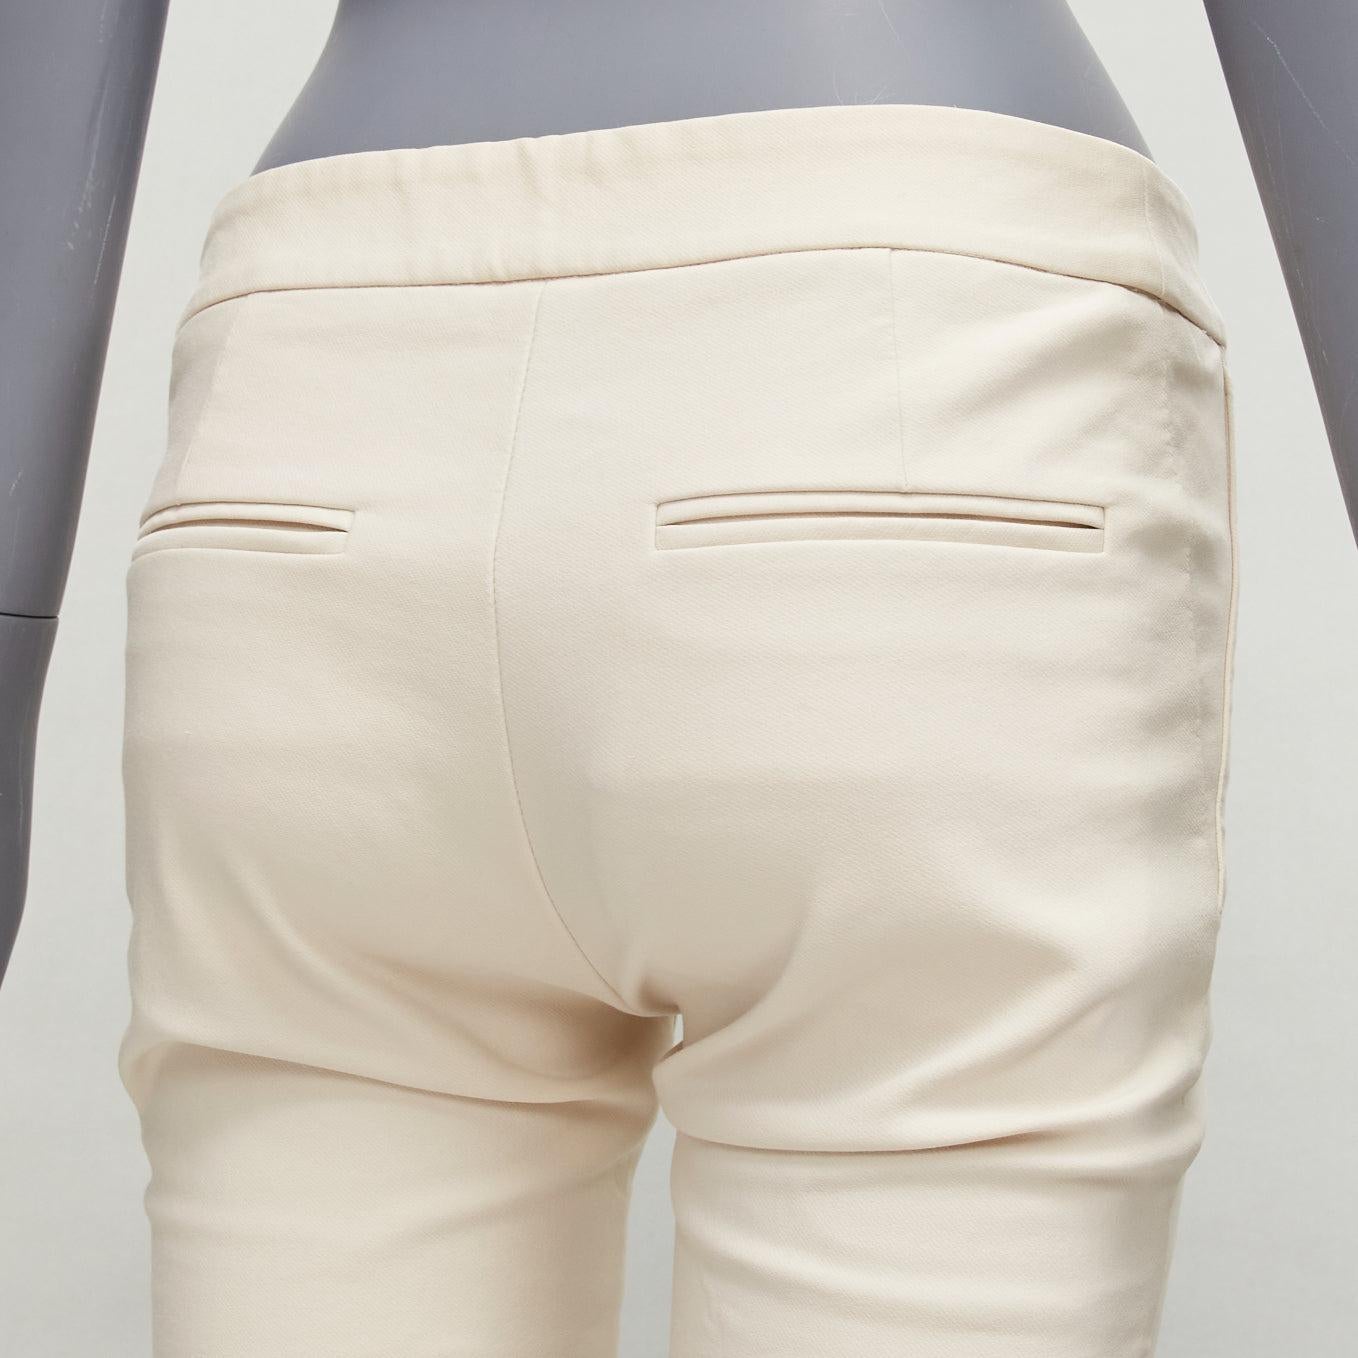 STELLA MCCARTNEY cream cotton blend stretchy cropped skinny pants IT38 XS
Reference: LNKO/A02242
Brand: Stella McCartney
Designer: Stella McCartney
Material: Cotton, Blend
Color: Cream
Pattern: Solid
Closure: Zip Fly
Made in: